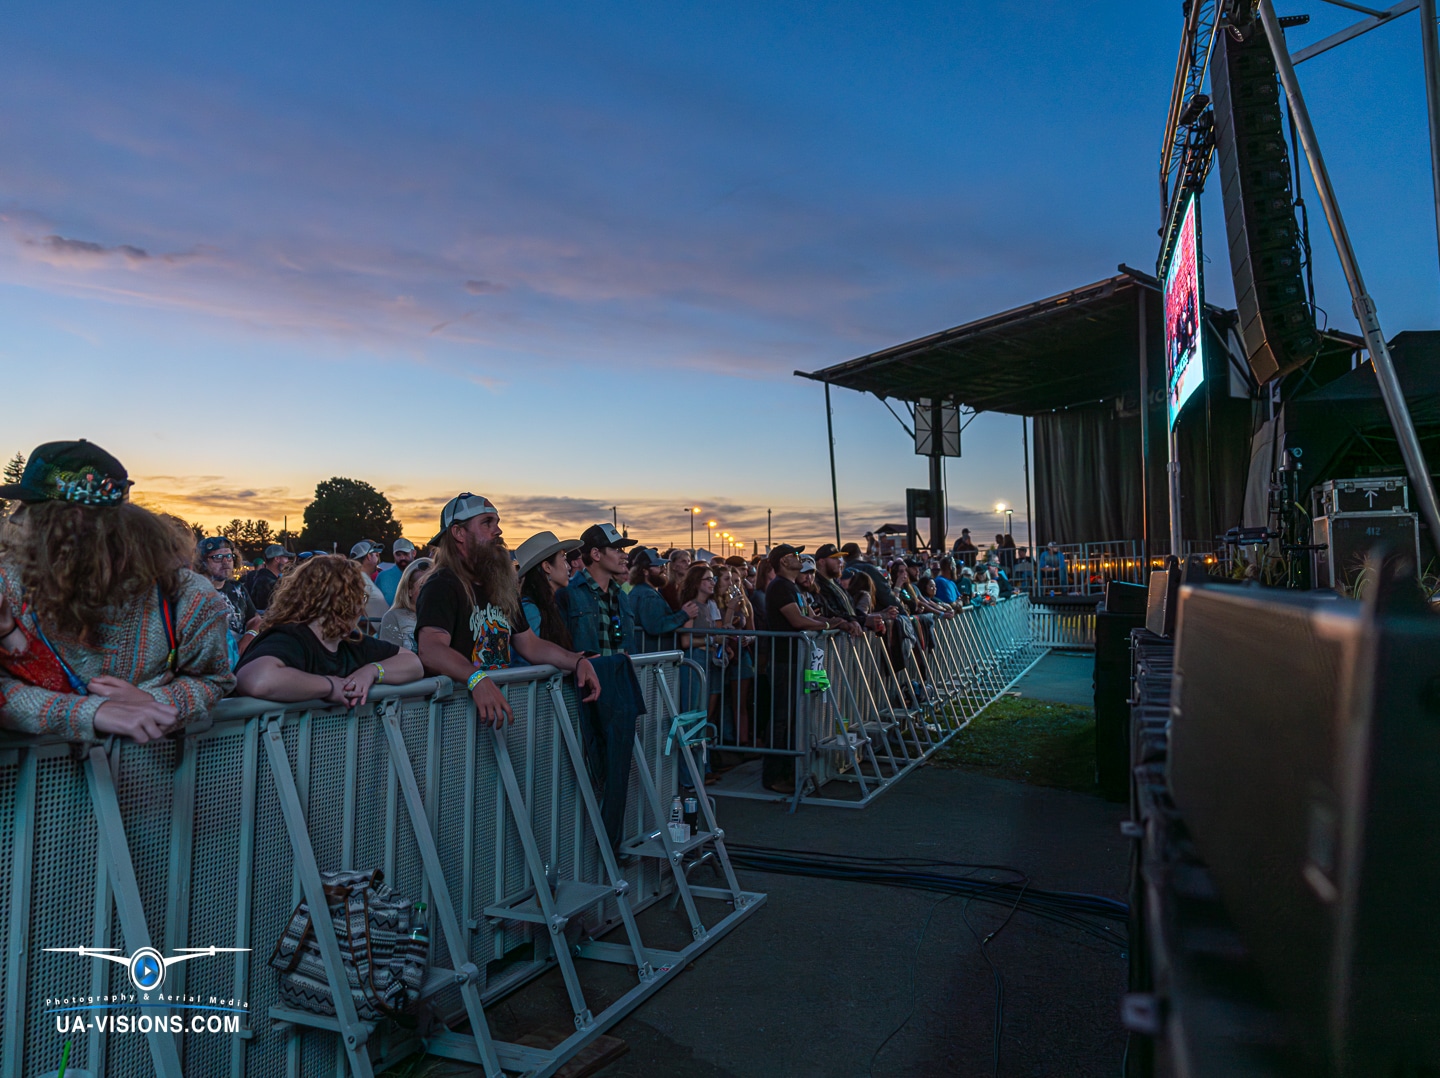 Crowd at Healing Appalachia music festival with sunset backdrop